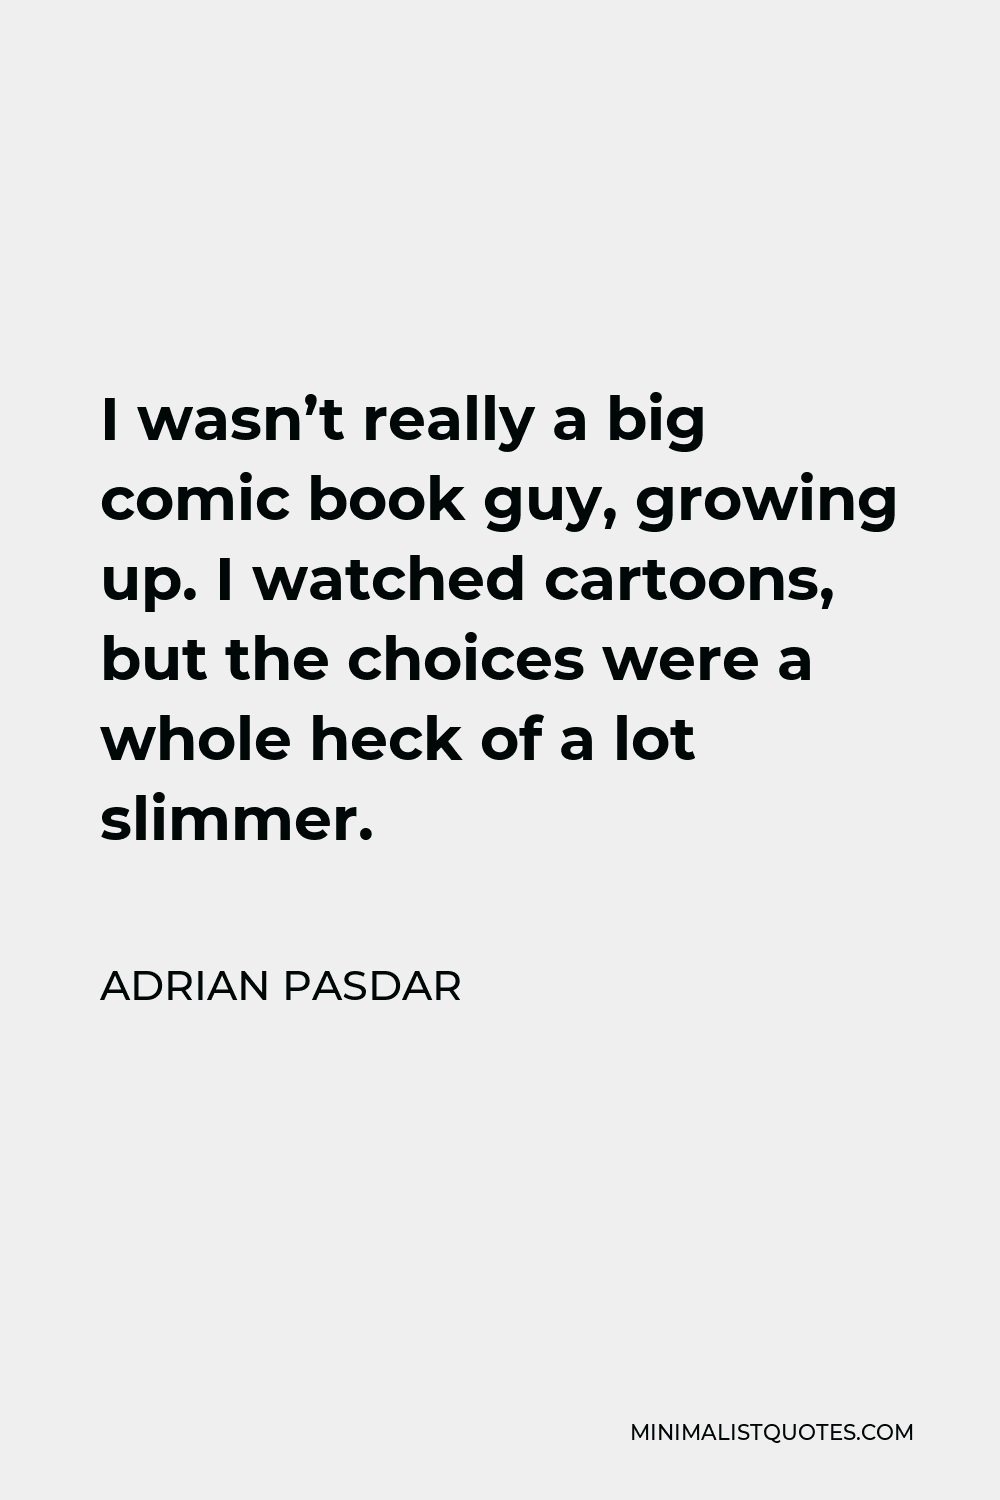 Adrian Pasdar Quote - I wasn’t really a big comic book guy, growing up. I watched cartoons, but the choices were a whole heck of a lot slimmer.